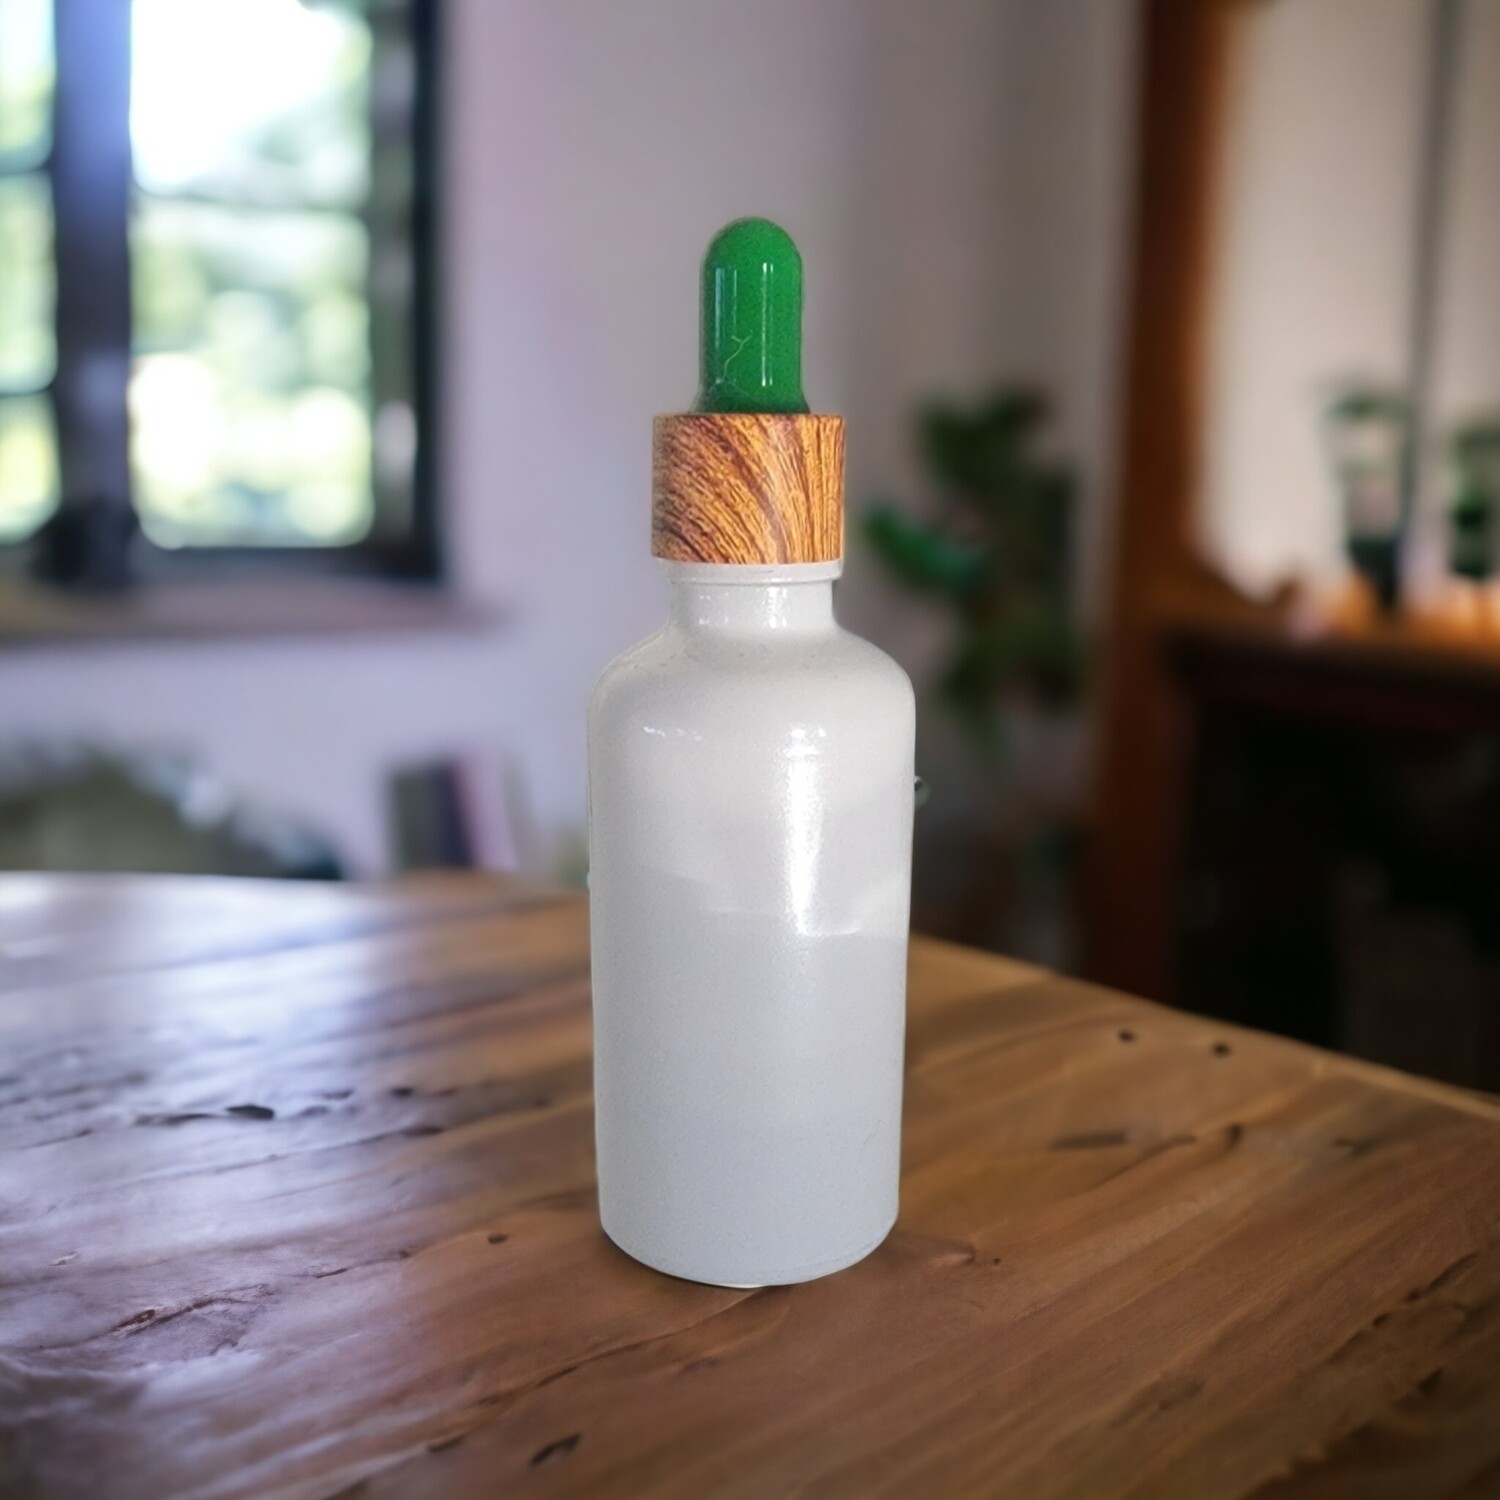 100mL WHITE PEARL (Coated) glass dropper bottle with GREEN TEAT & IMITATION DARK TIMBER CAP